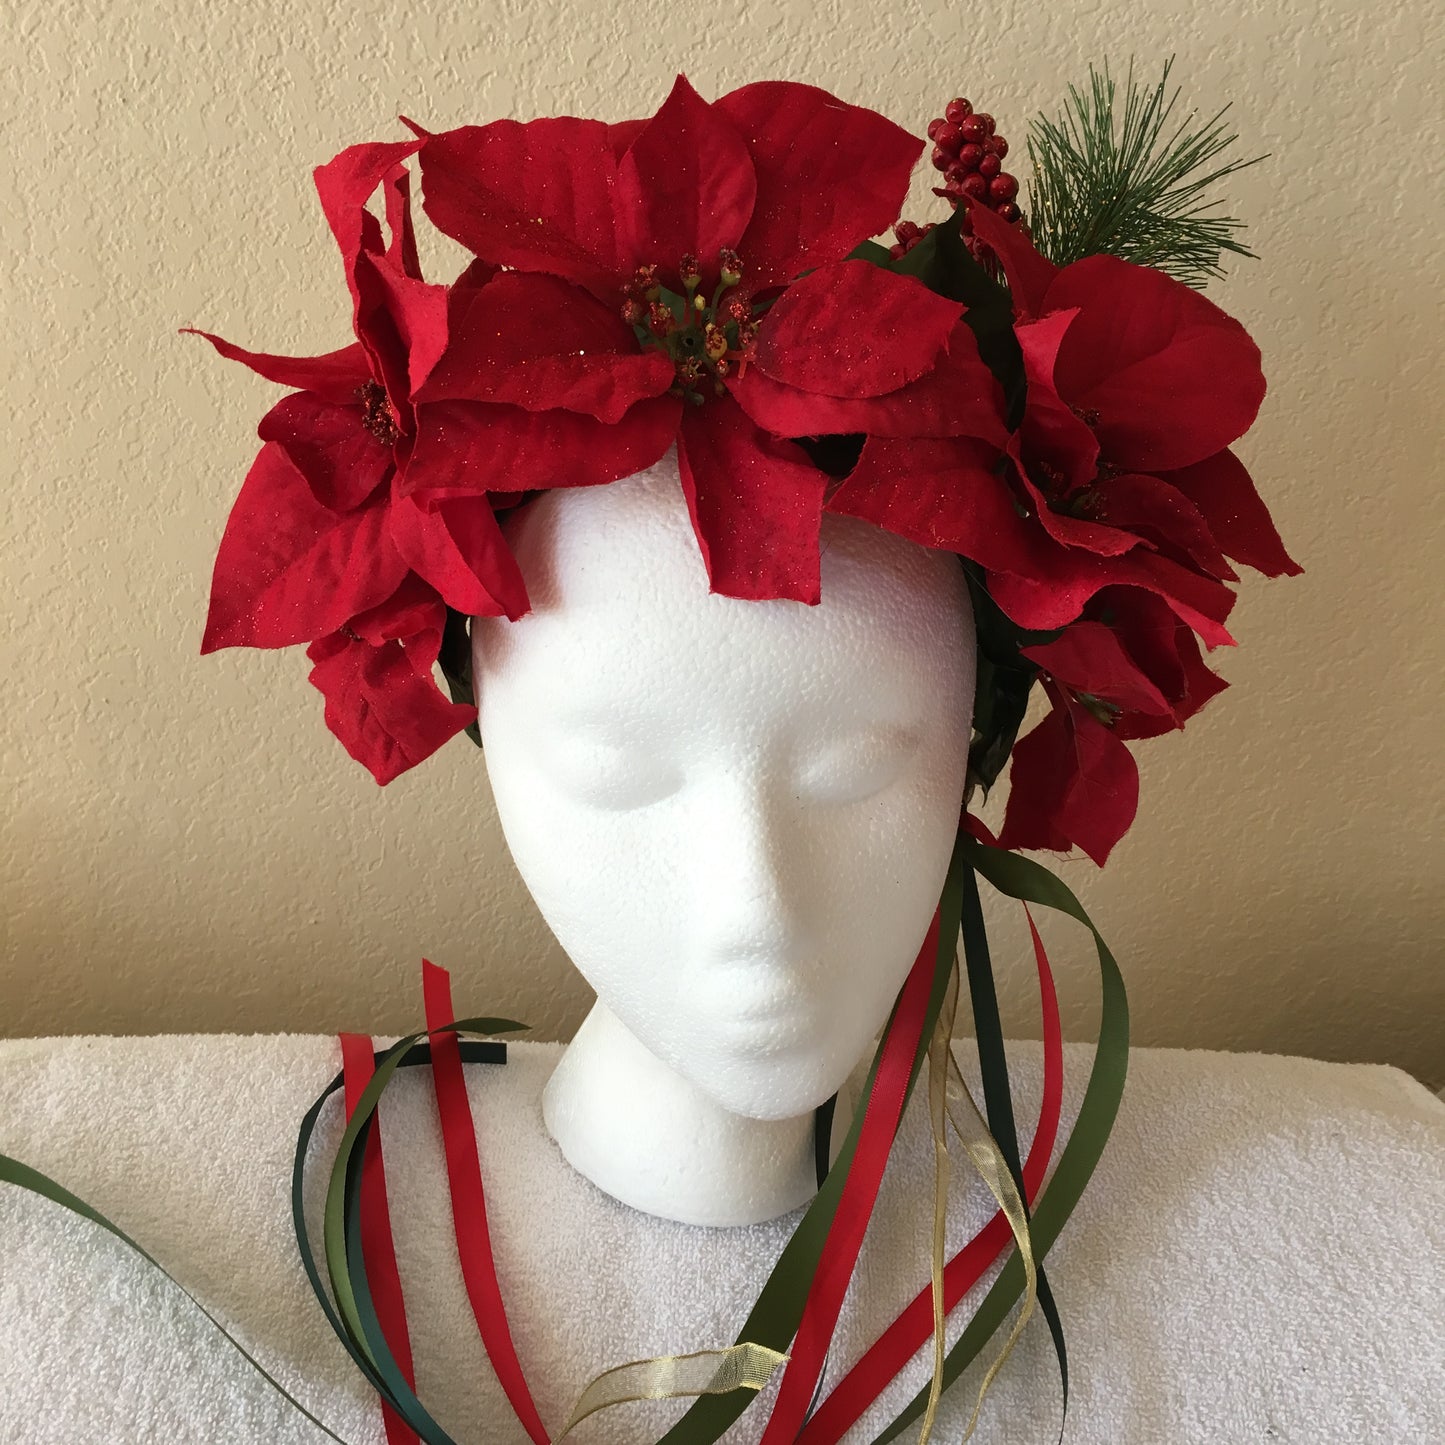 Extra Large Wreath - Extra large red poinsettias